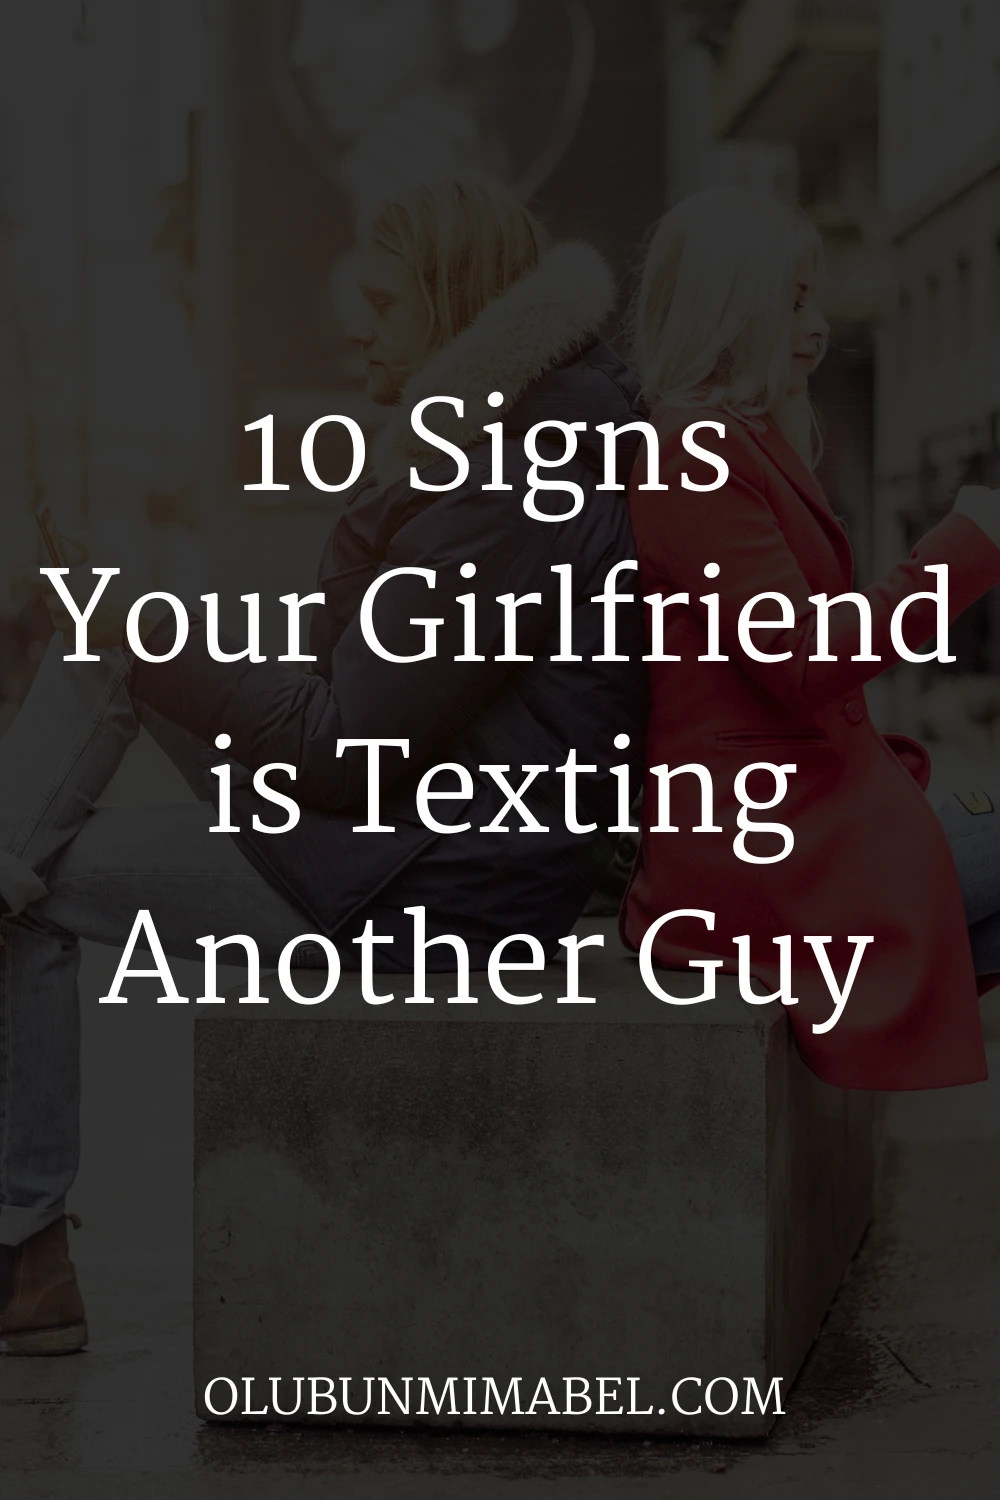 How To Tell if Your Girlfriend is Texting Another Guy